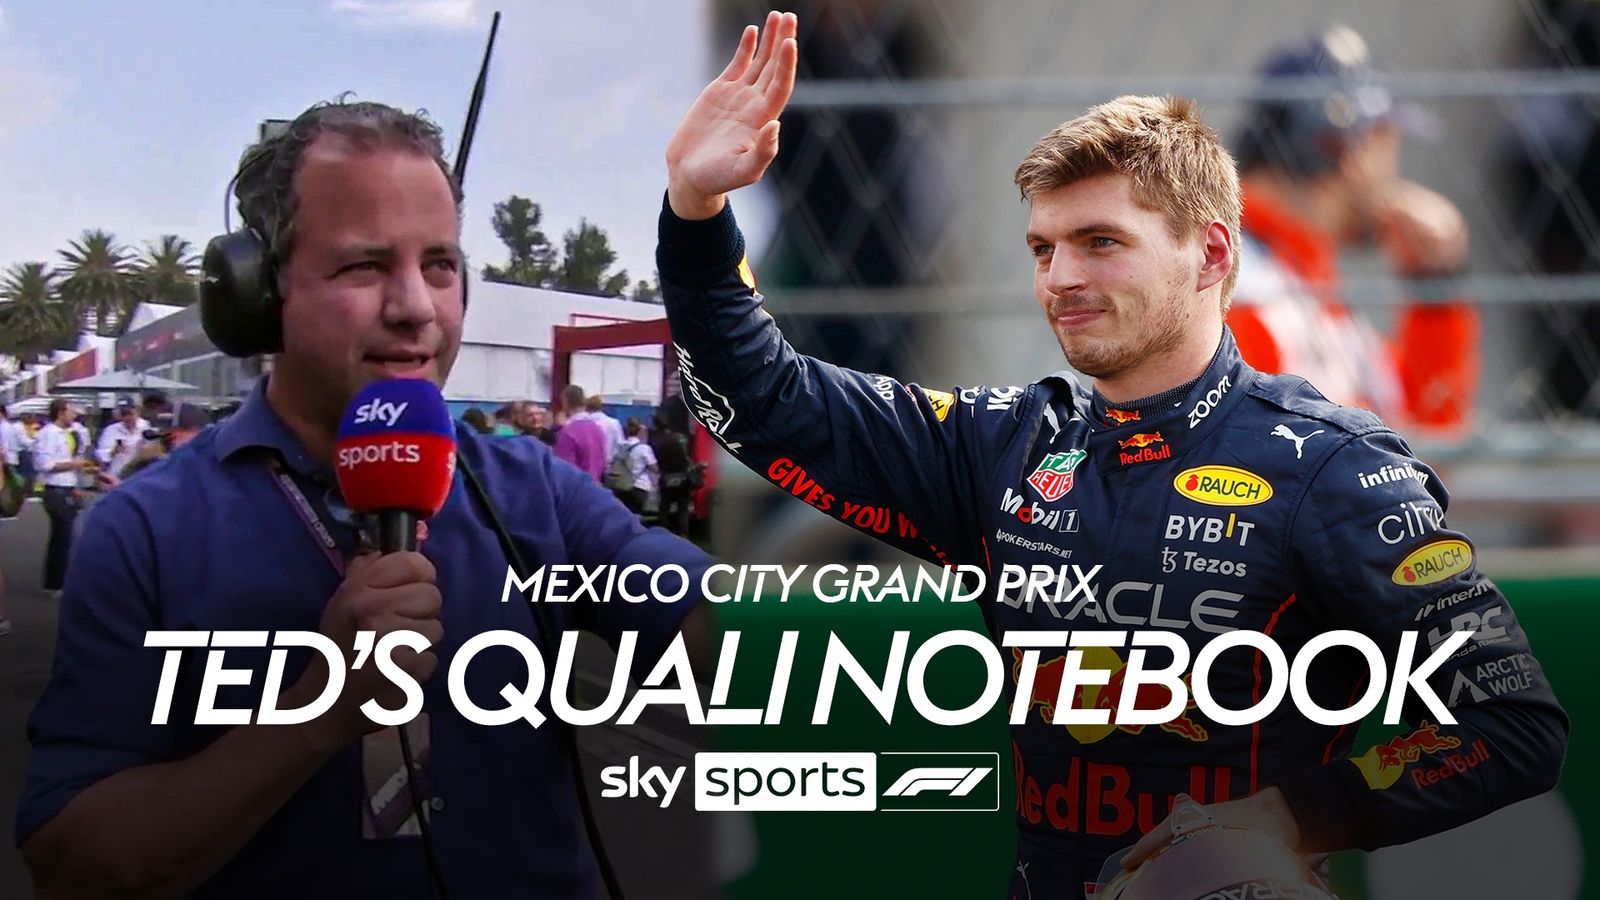 Ted's Qualifying Notebook | Mexico City Grand Prix | F1 News | Sky Sports